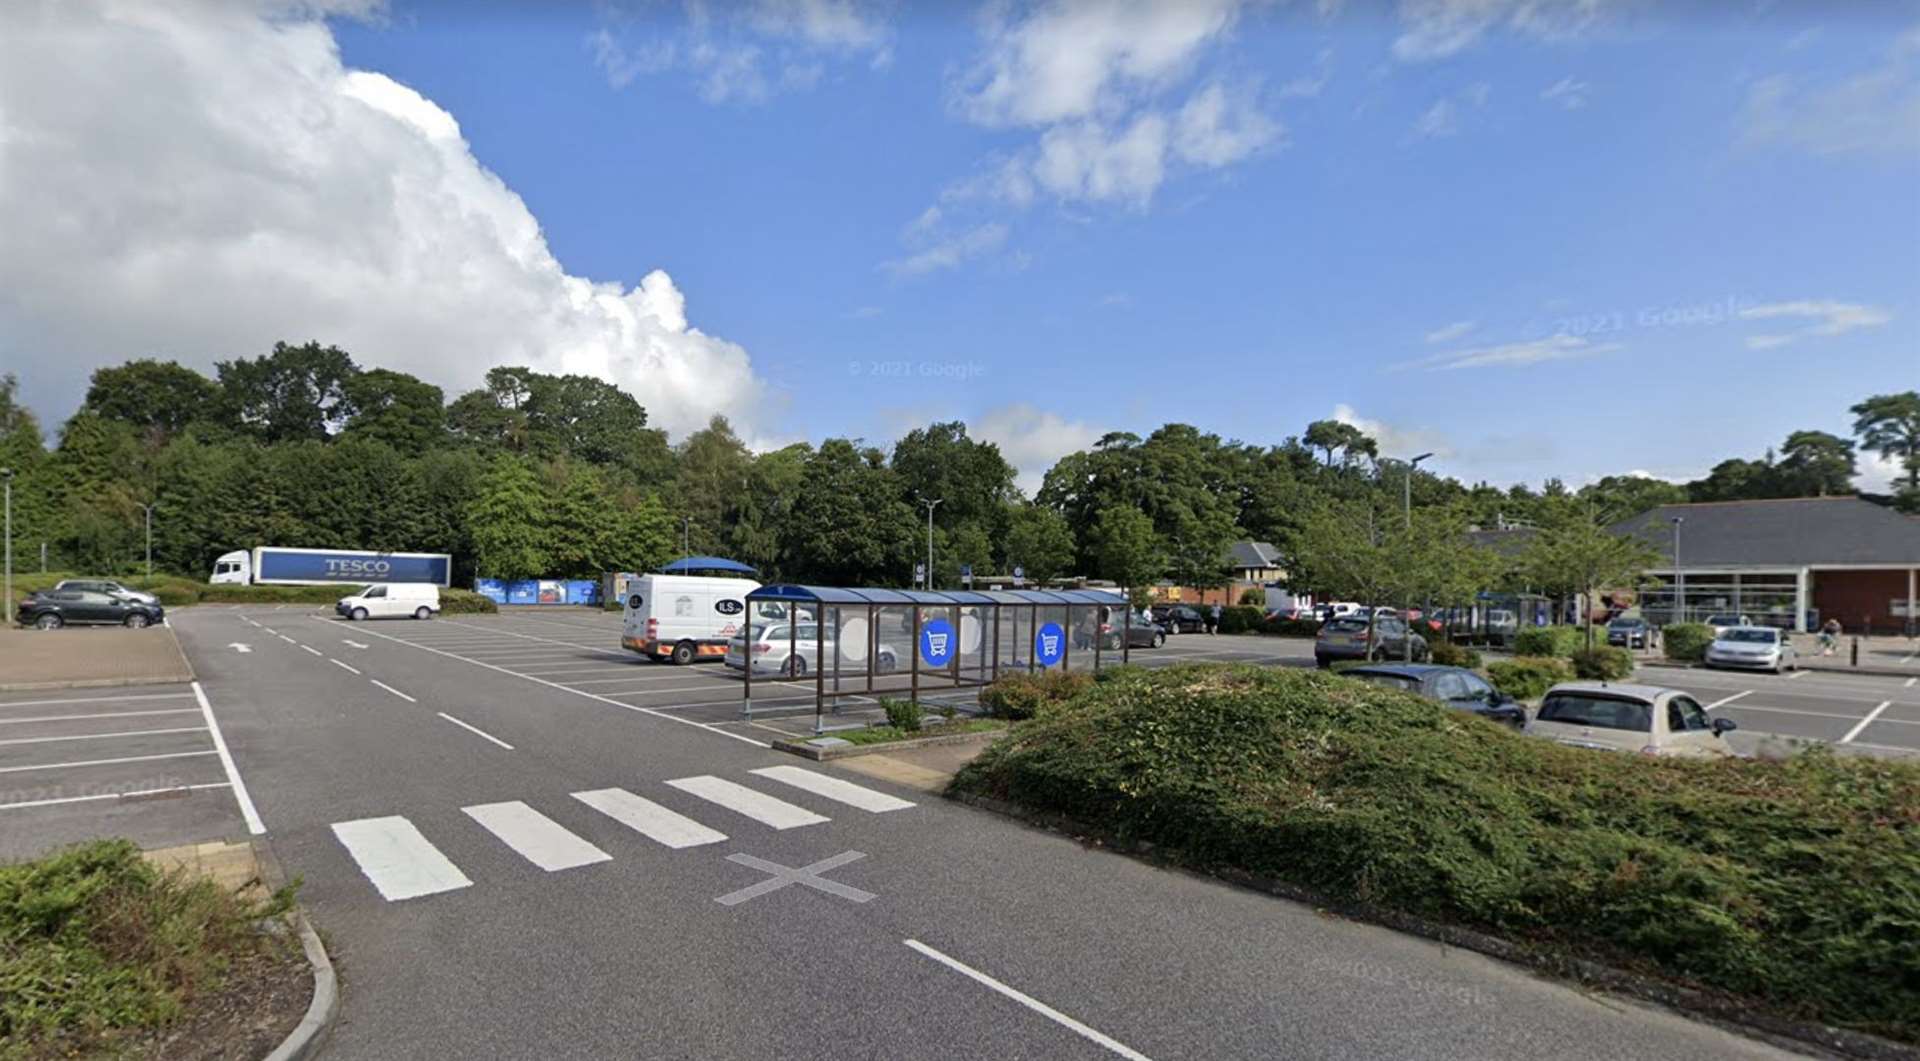 South East Water has set up a bottled water station at the Tesco Superstore. Picture: Google Street View